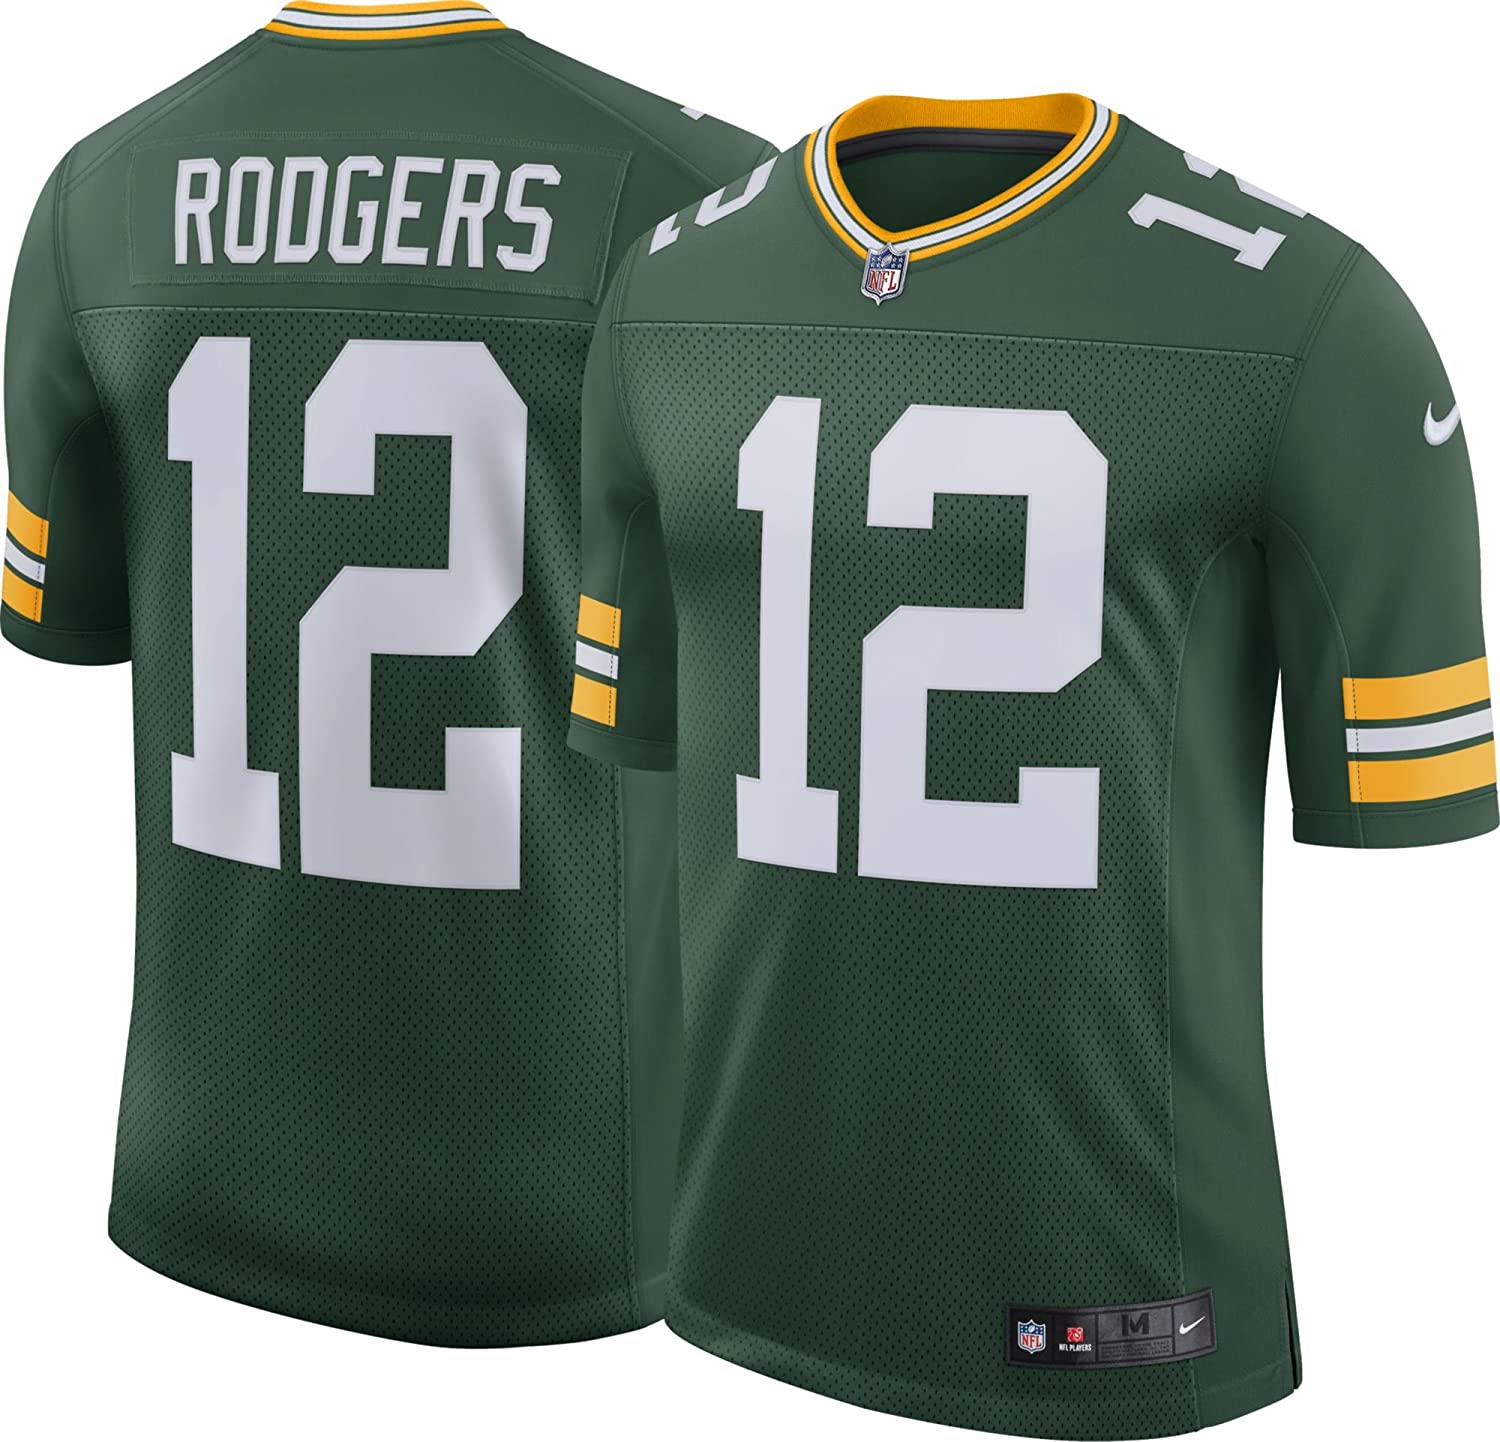 Aaron Rodgers Green Bay Packers Jersey